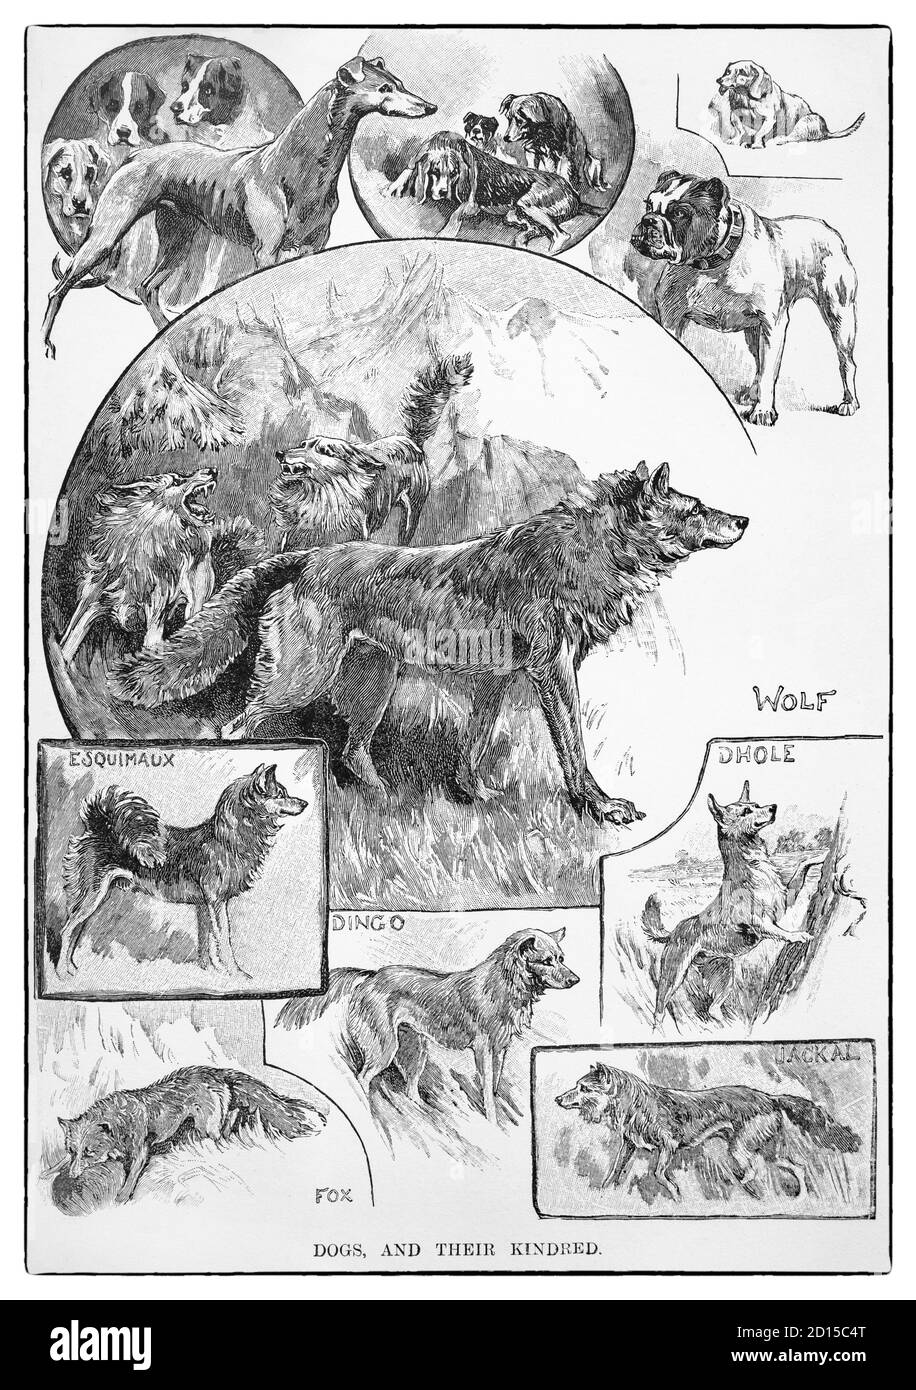 A selection of dogs and their kindred. The dog (Canis familiaris when considered a distinct species or Canis lupus familiaris when considered a subspecies of the wolf  is a domesticated carnivore of the family Canidae. Dogs vary widely in shape, size, and colors and perform many roles for humans, such as hunting, herding, pulling loads, protection, assisting police and military, companionship, and, more recently, aiding disabled people, and therapeutic roles. This influence on human society has given them the sobriquet of 'man's best friend.' Stock Photo